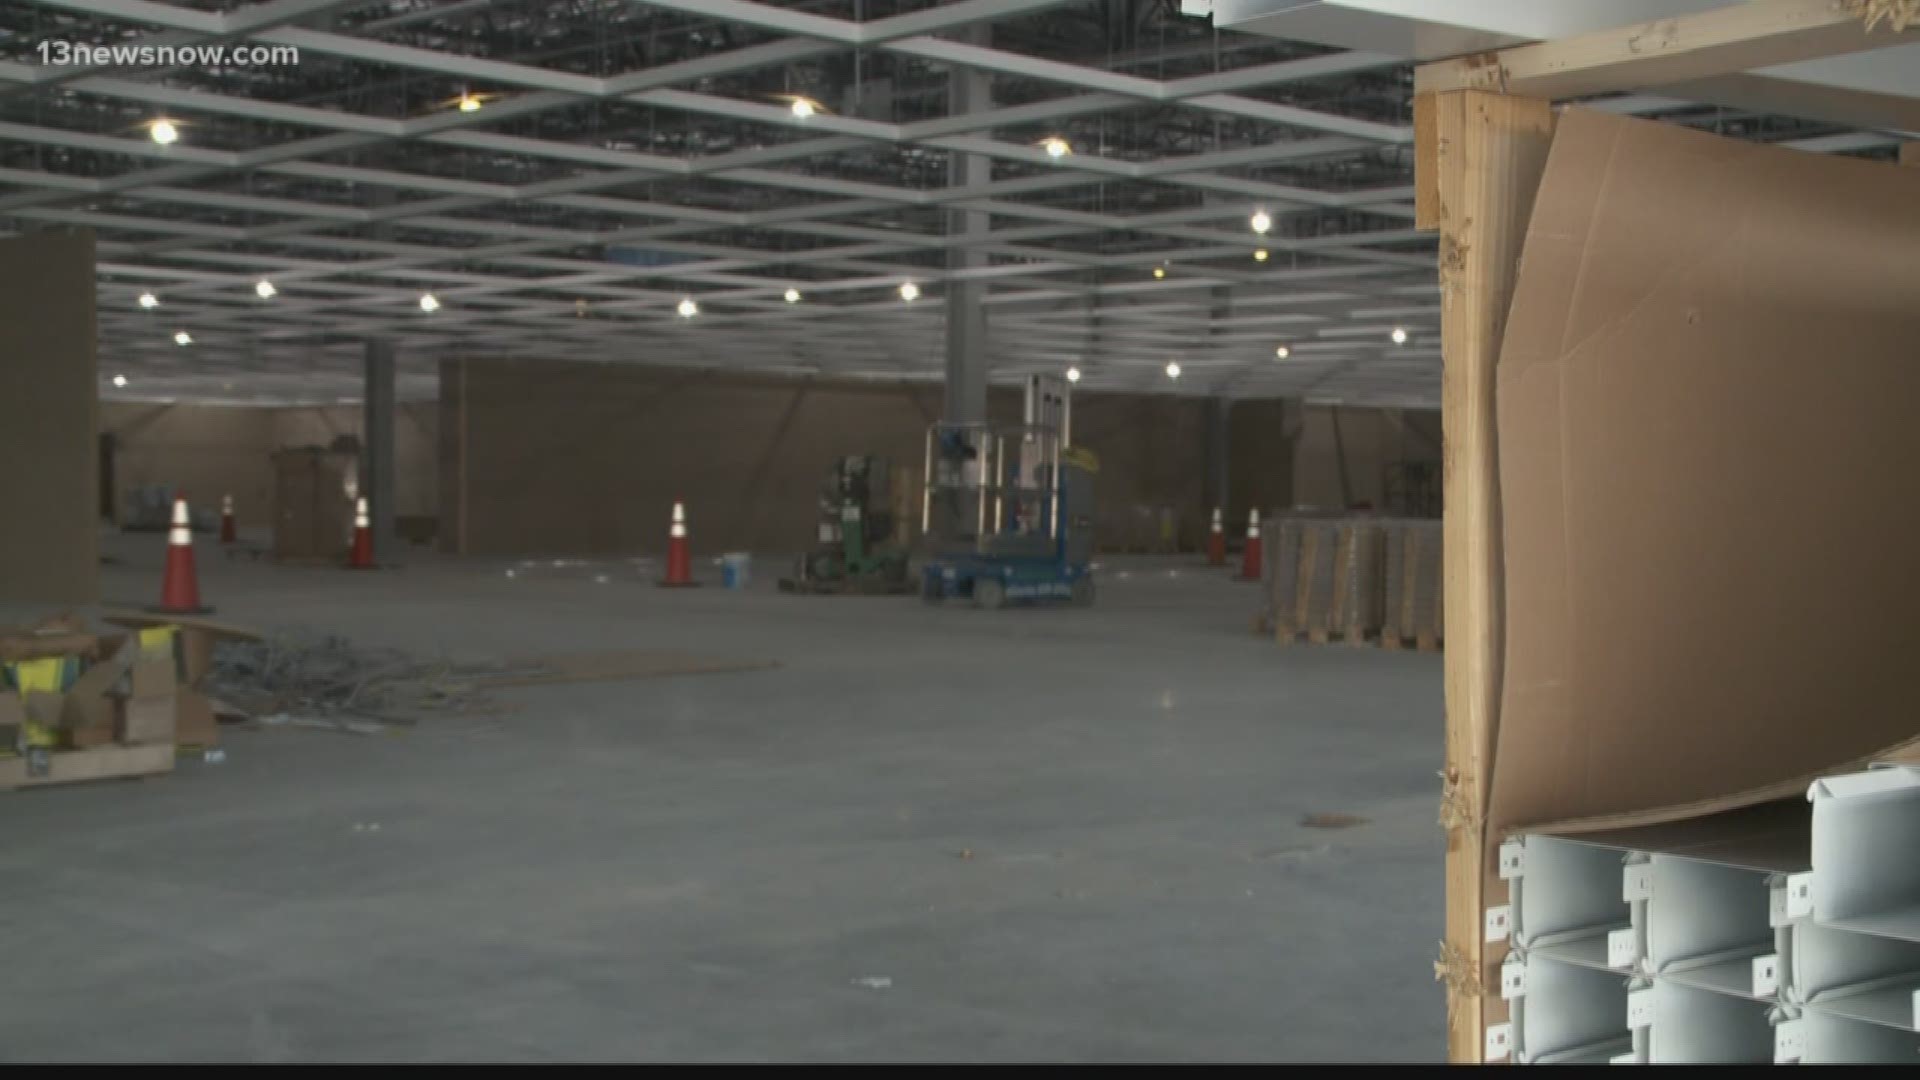 We're getting an early look at the work done inside of Norfolk's new IKEA.